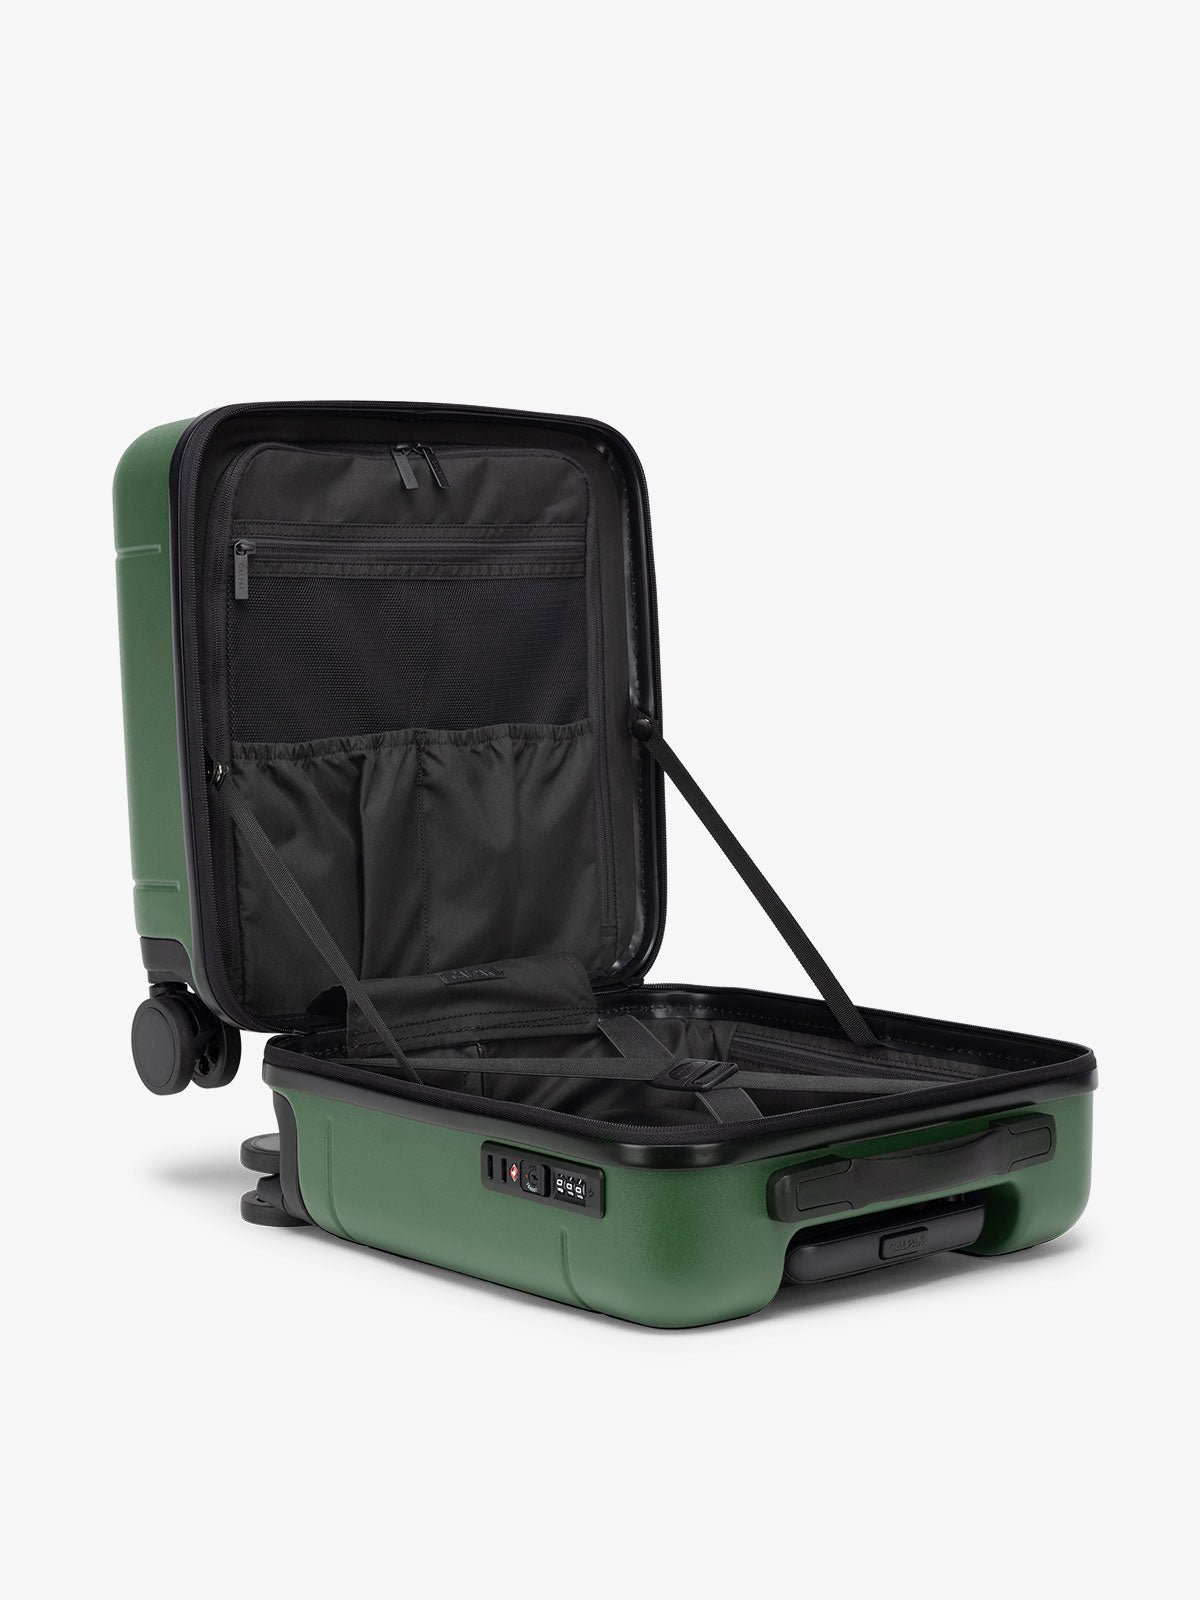 Hue small carry-on featuring compression straps in green